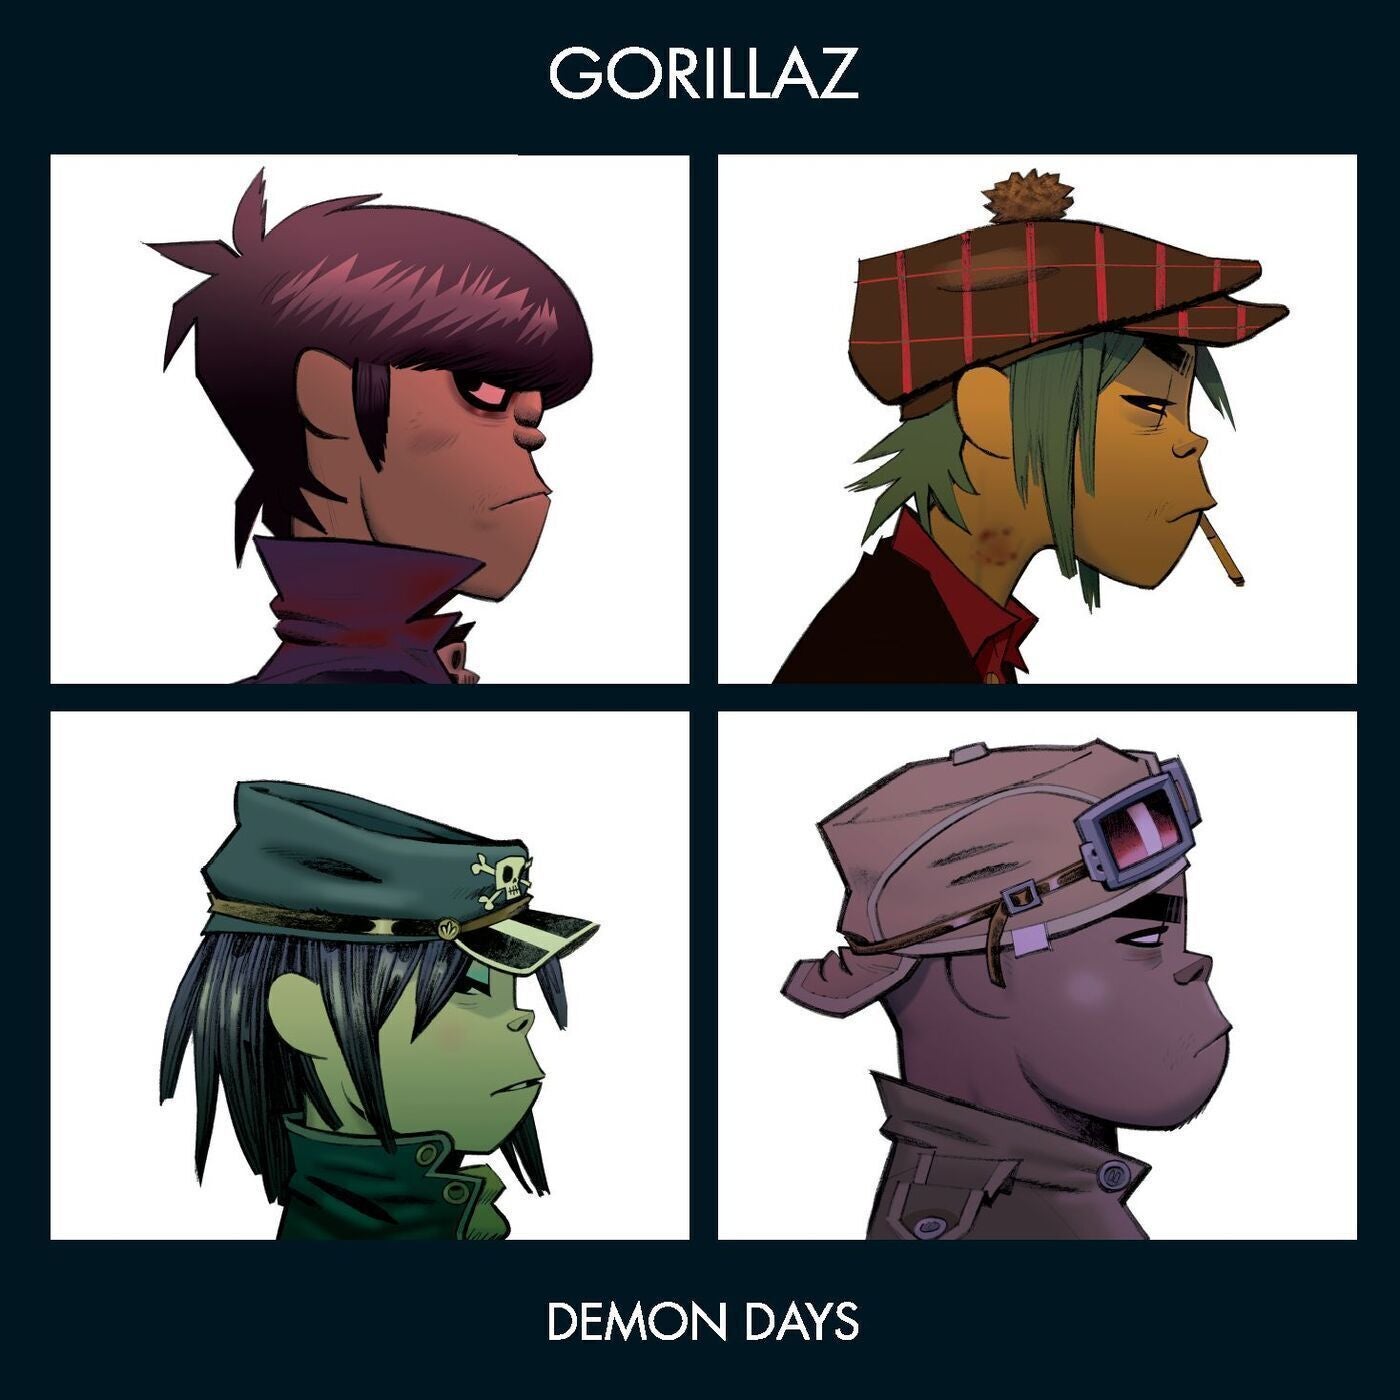 Demon Days by Gorillaz and Roots Manuva on Beatsource.